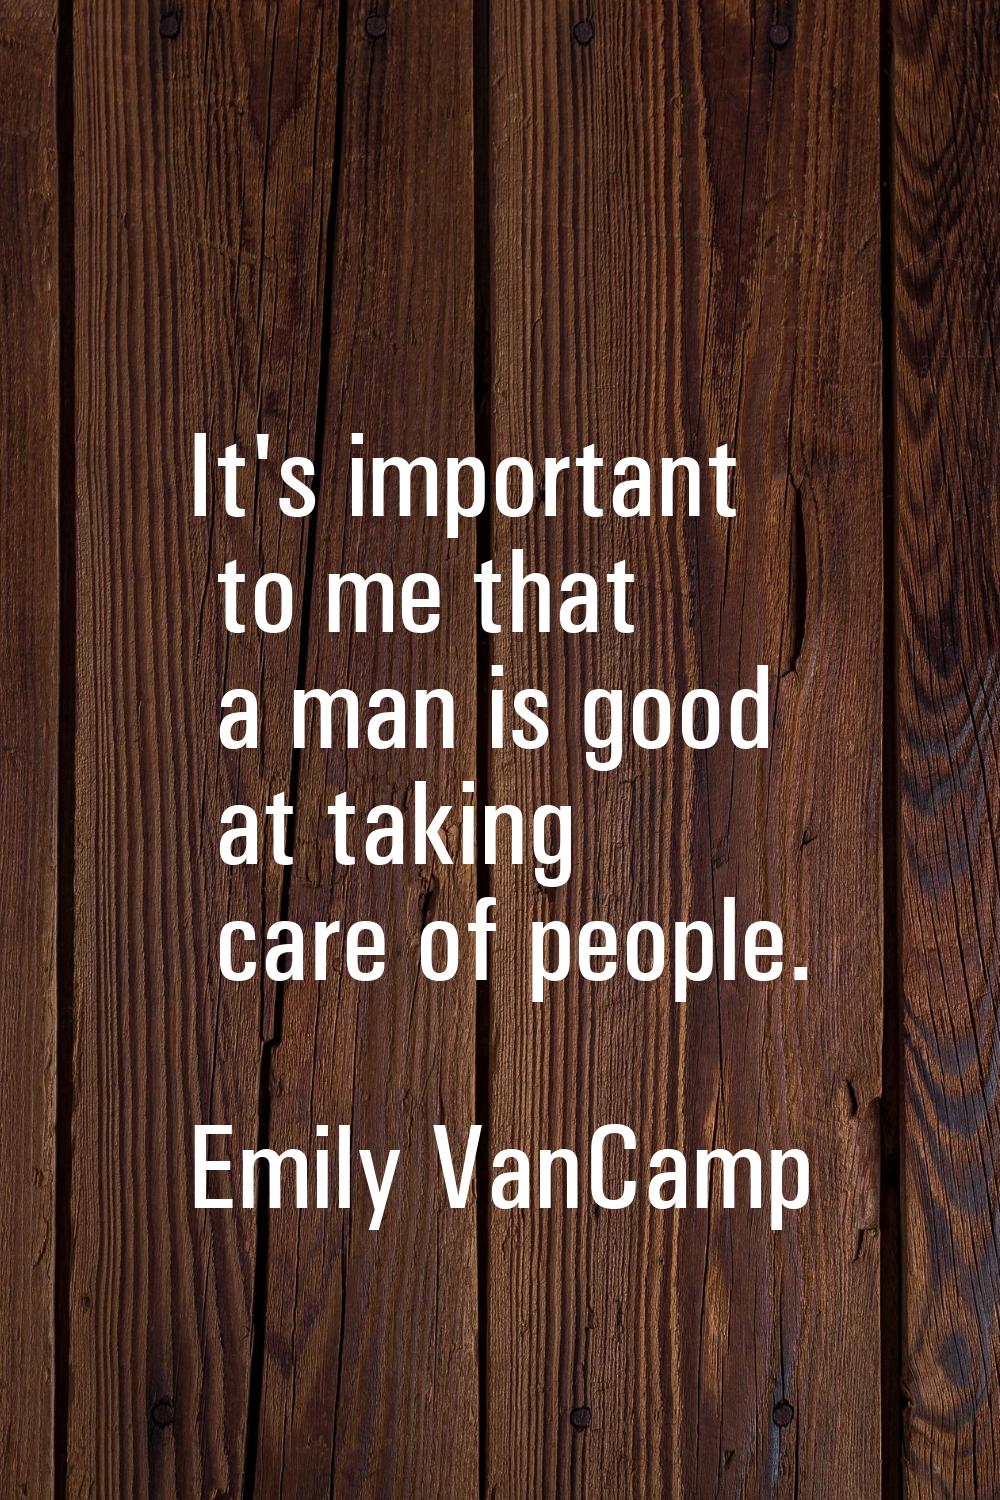 It's important to me that a man is good at taking care of people.